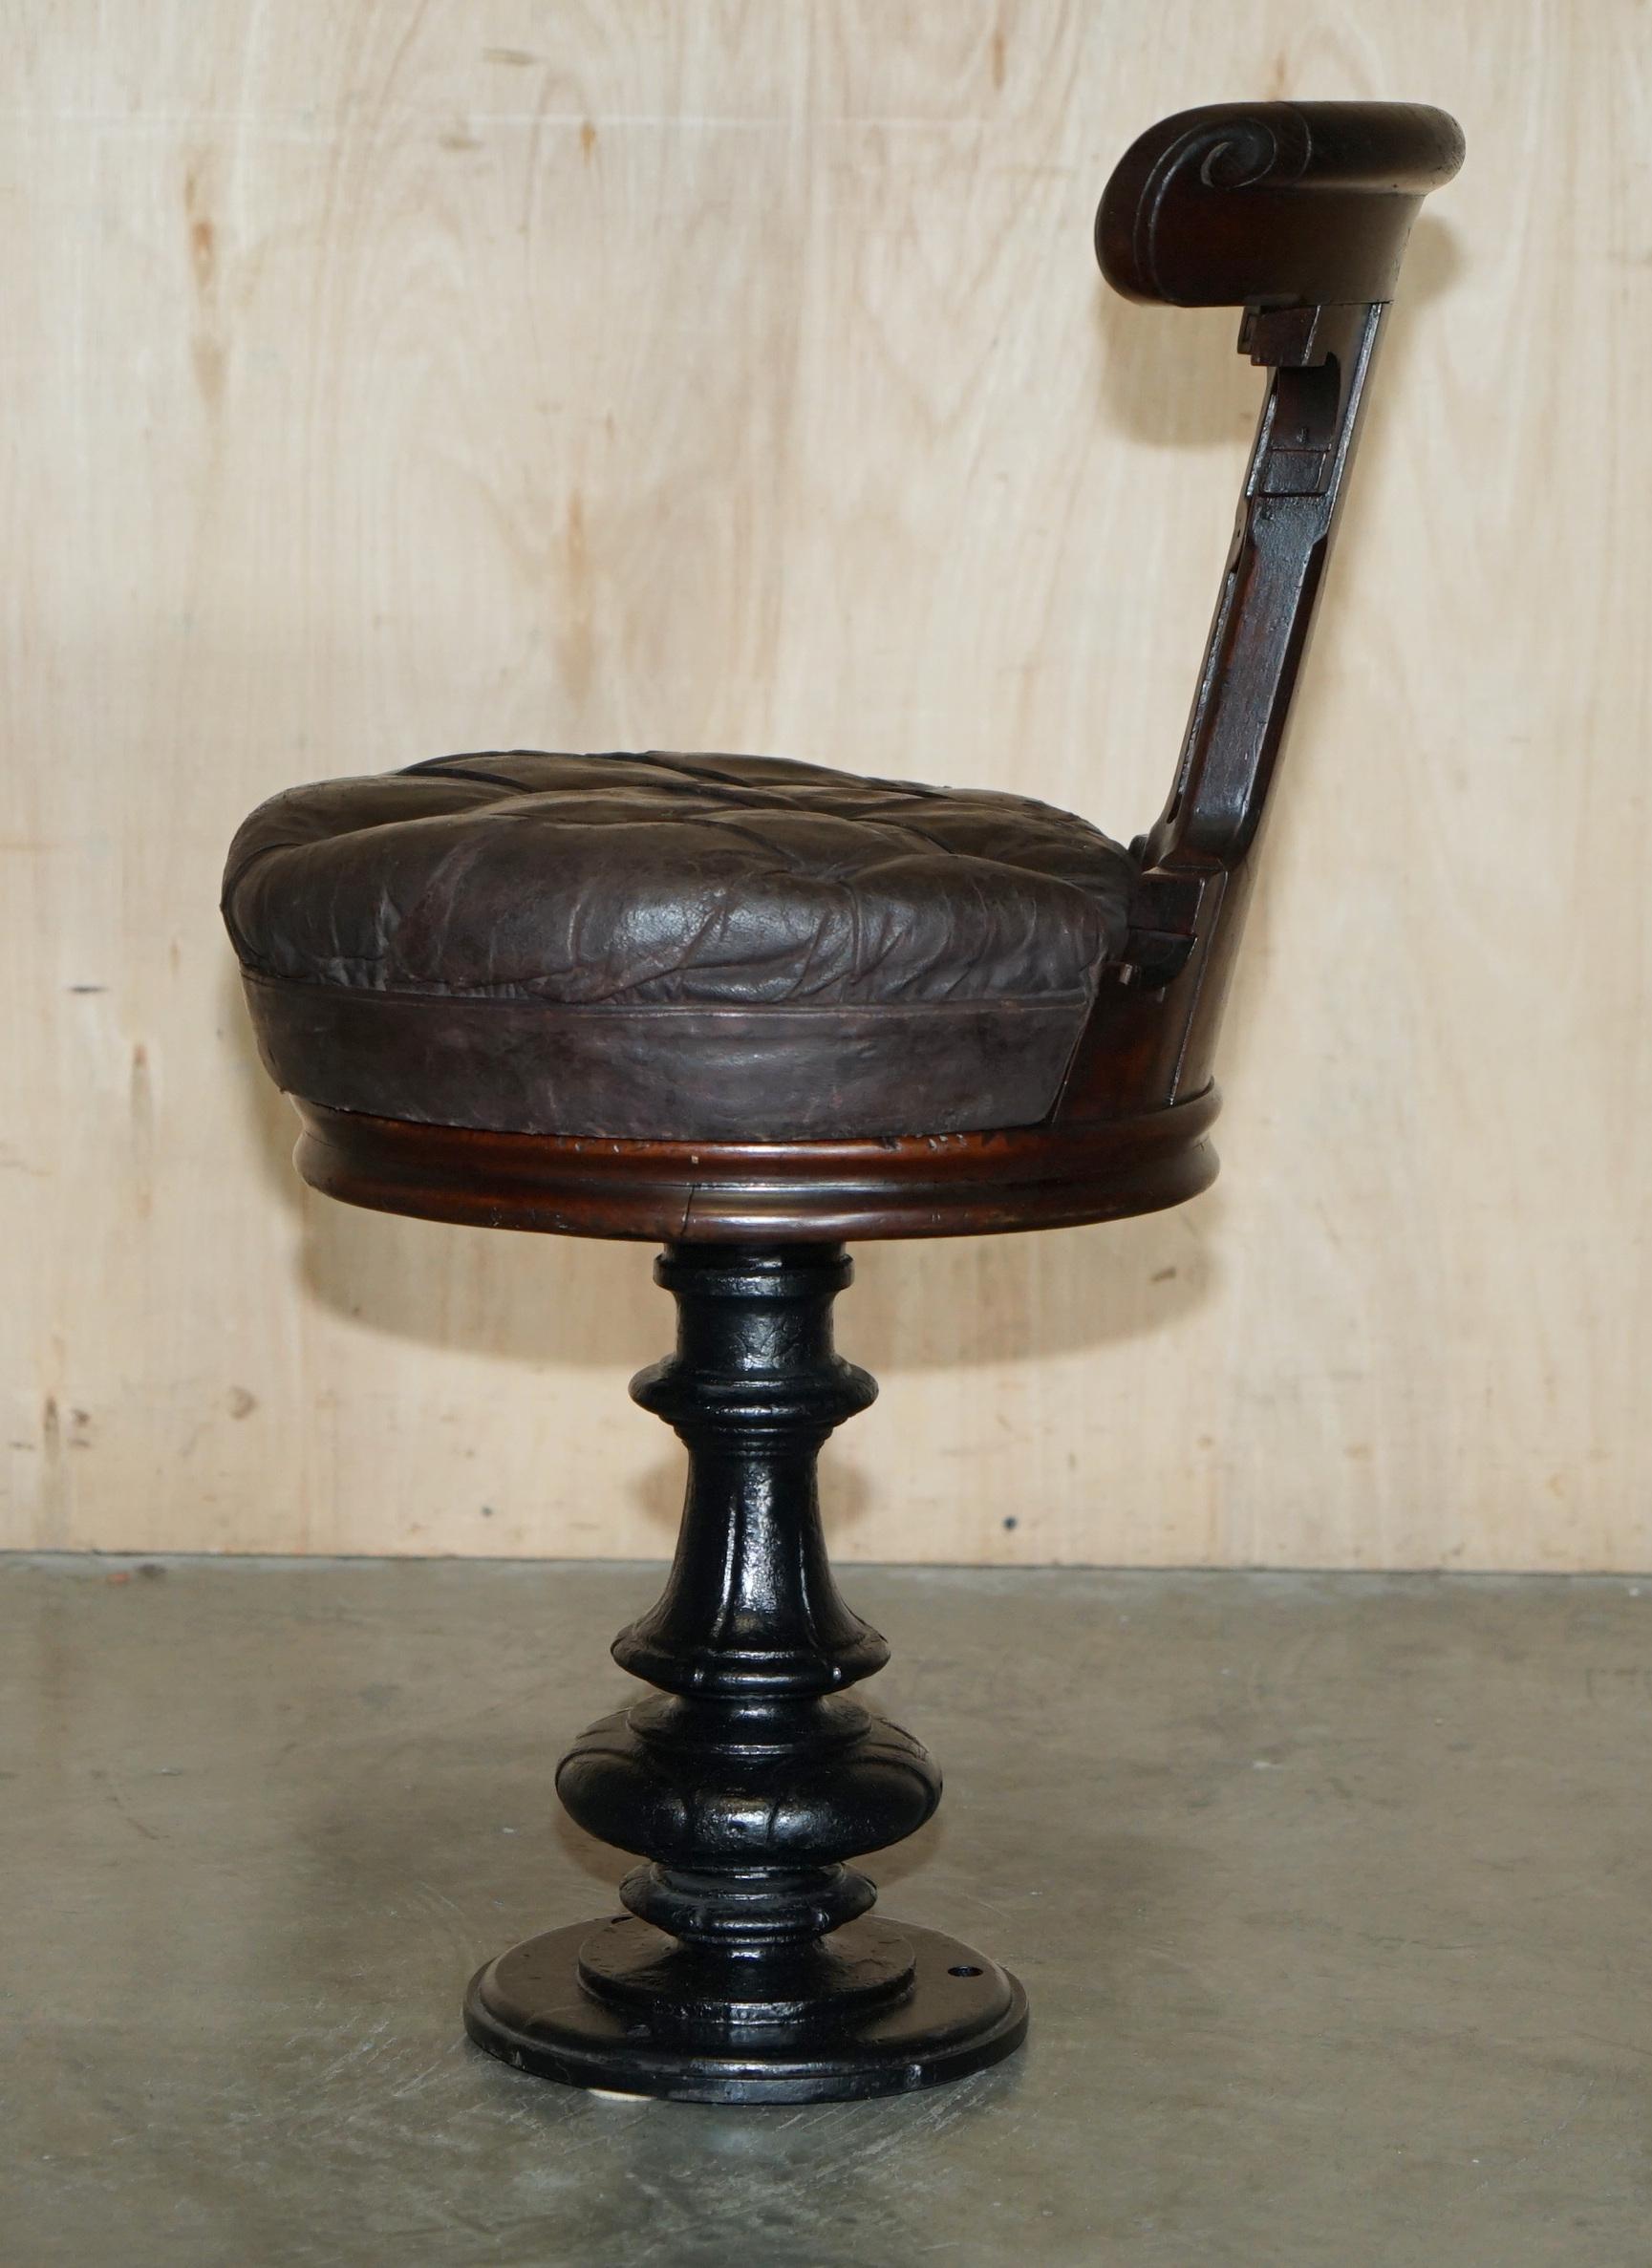 ANTIQUE CIRCA 1800 SHIPS CAPTAiNS CHAIR WITH ROYAL CROWN AND ANCHOR CARVED For Sale 7